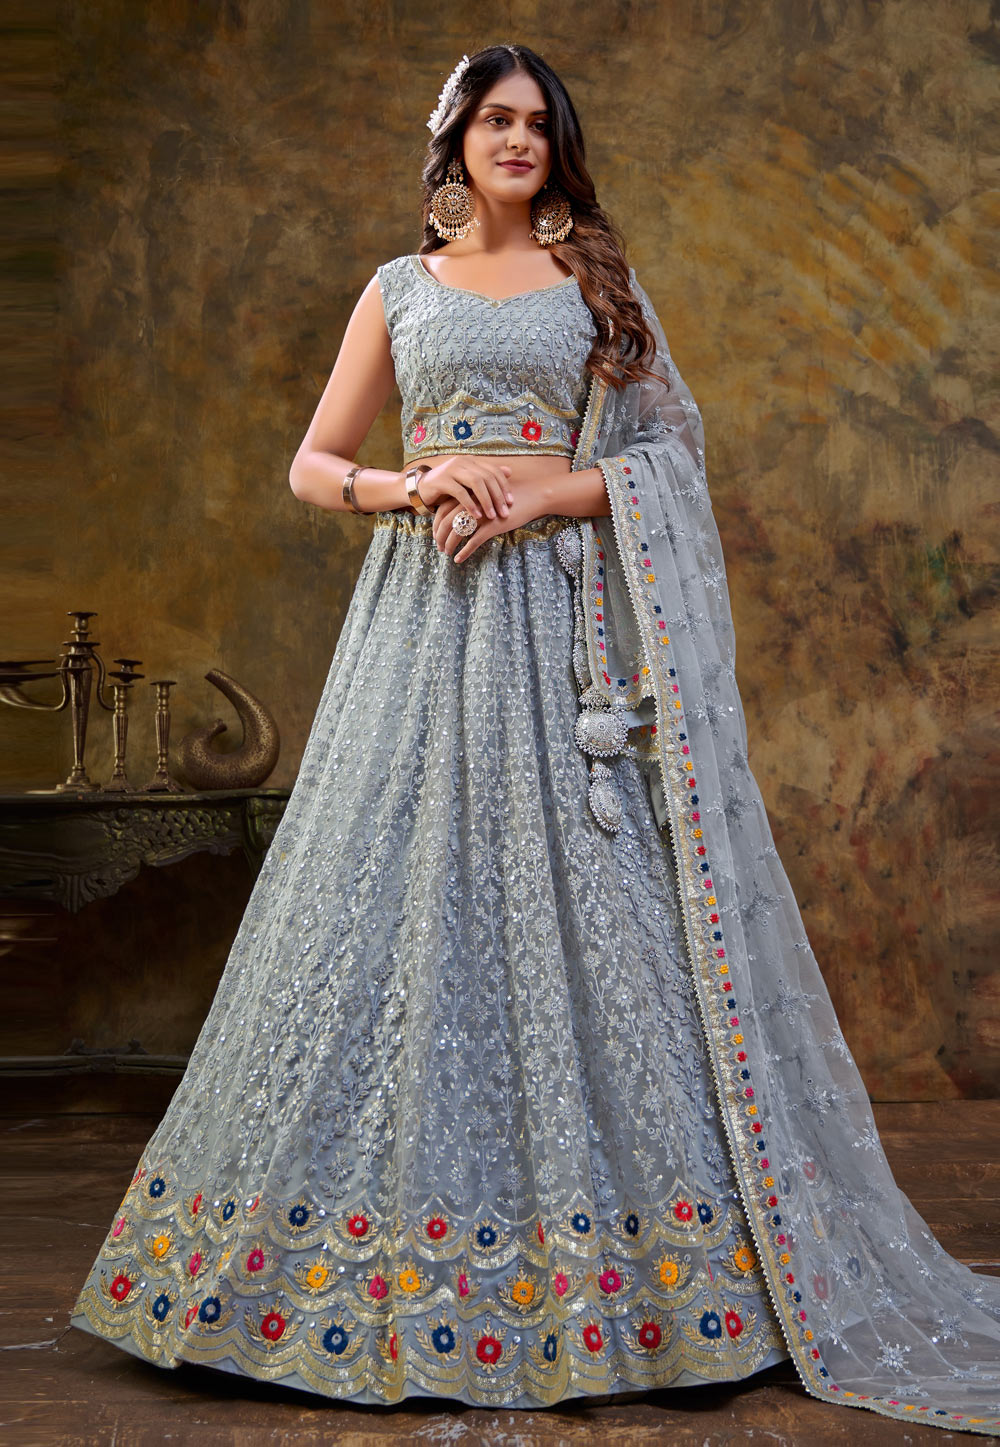 Buy Seaside Blue Lehenga Choli With Heavy Hand Embellished Moroccan And  Floral Pattern Online - Kalki Fashion